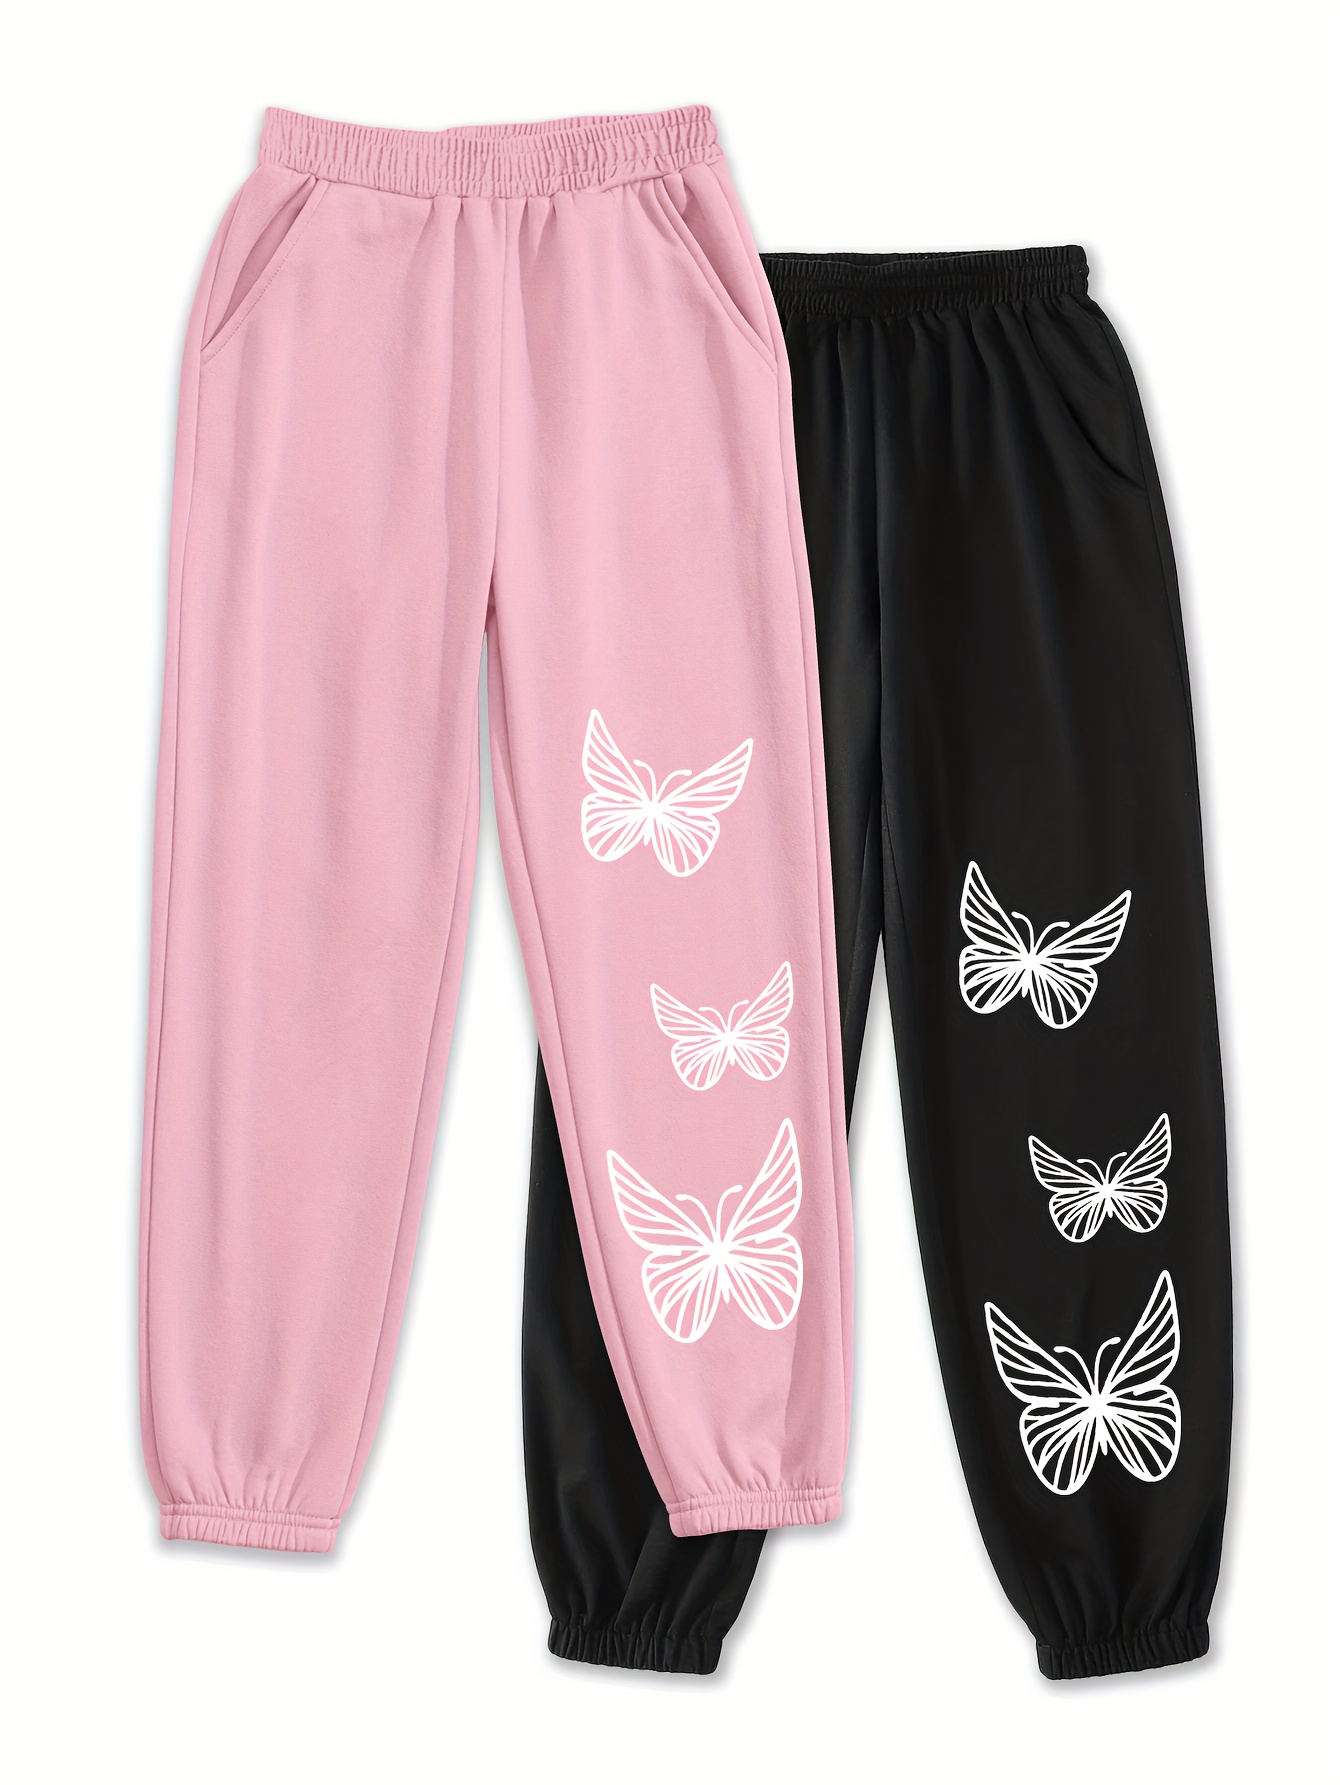 SHEIN Young Girl Reflective Butterfly Print Leggings